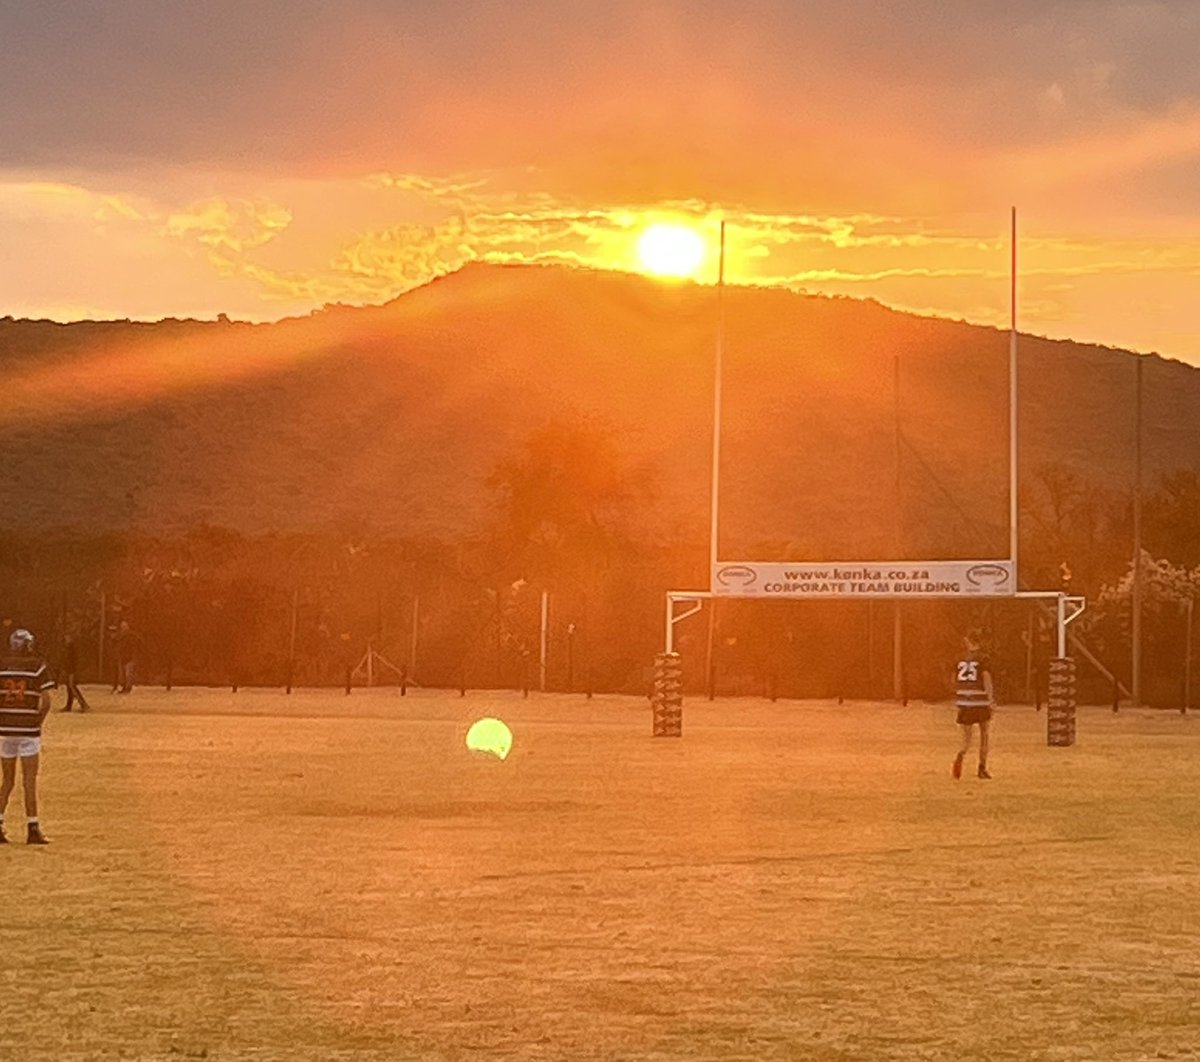 From Konka Camp with ❤️, so proud to have 41 boys on tour who love what they do and pursue their passions @AKSSchool , win lose or draw the game is what matters and the friendships and team spirit carries us forward as 1 👌
#weareAKS
#SA2022🇿🇦🏉
#lifetimememories